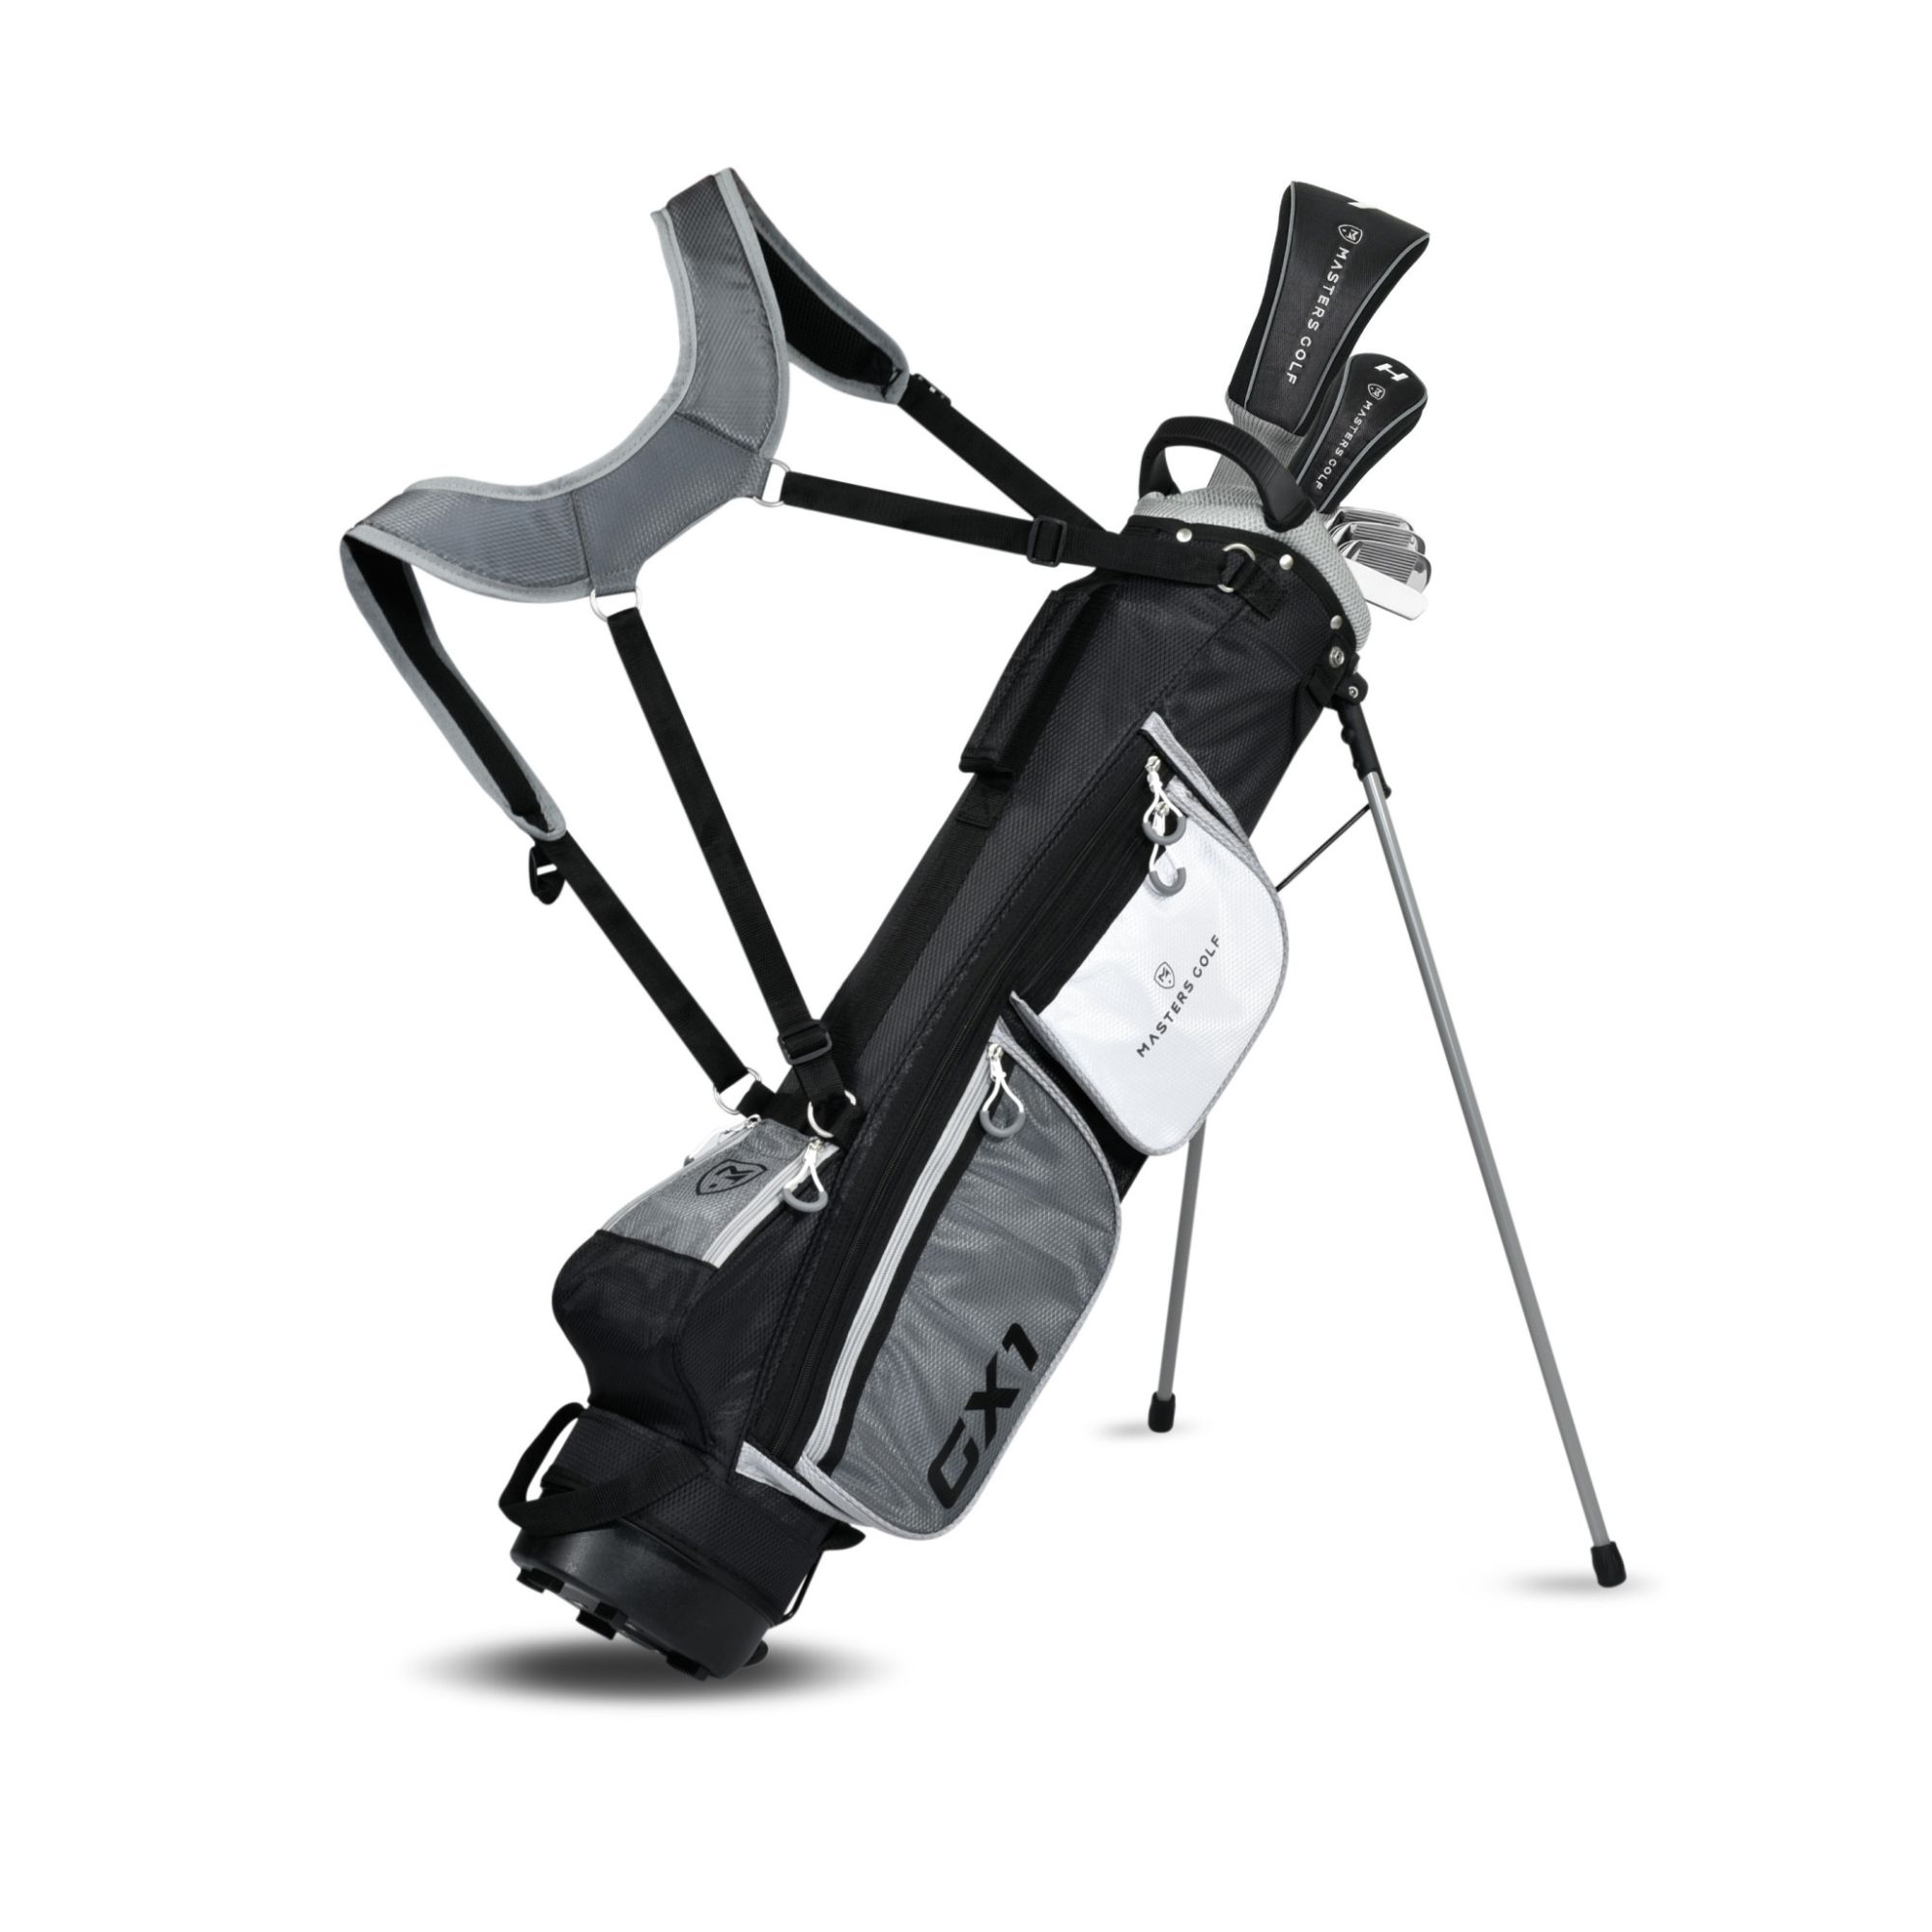 GX1 Mens Graphite Half Set With Stand Bag - Peter Field Golf Shop